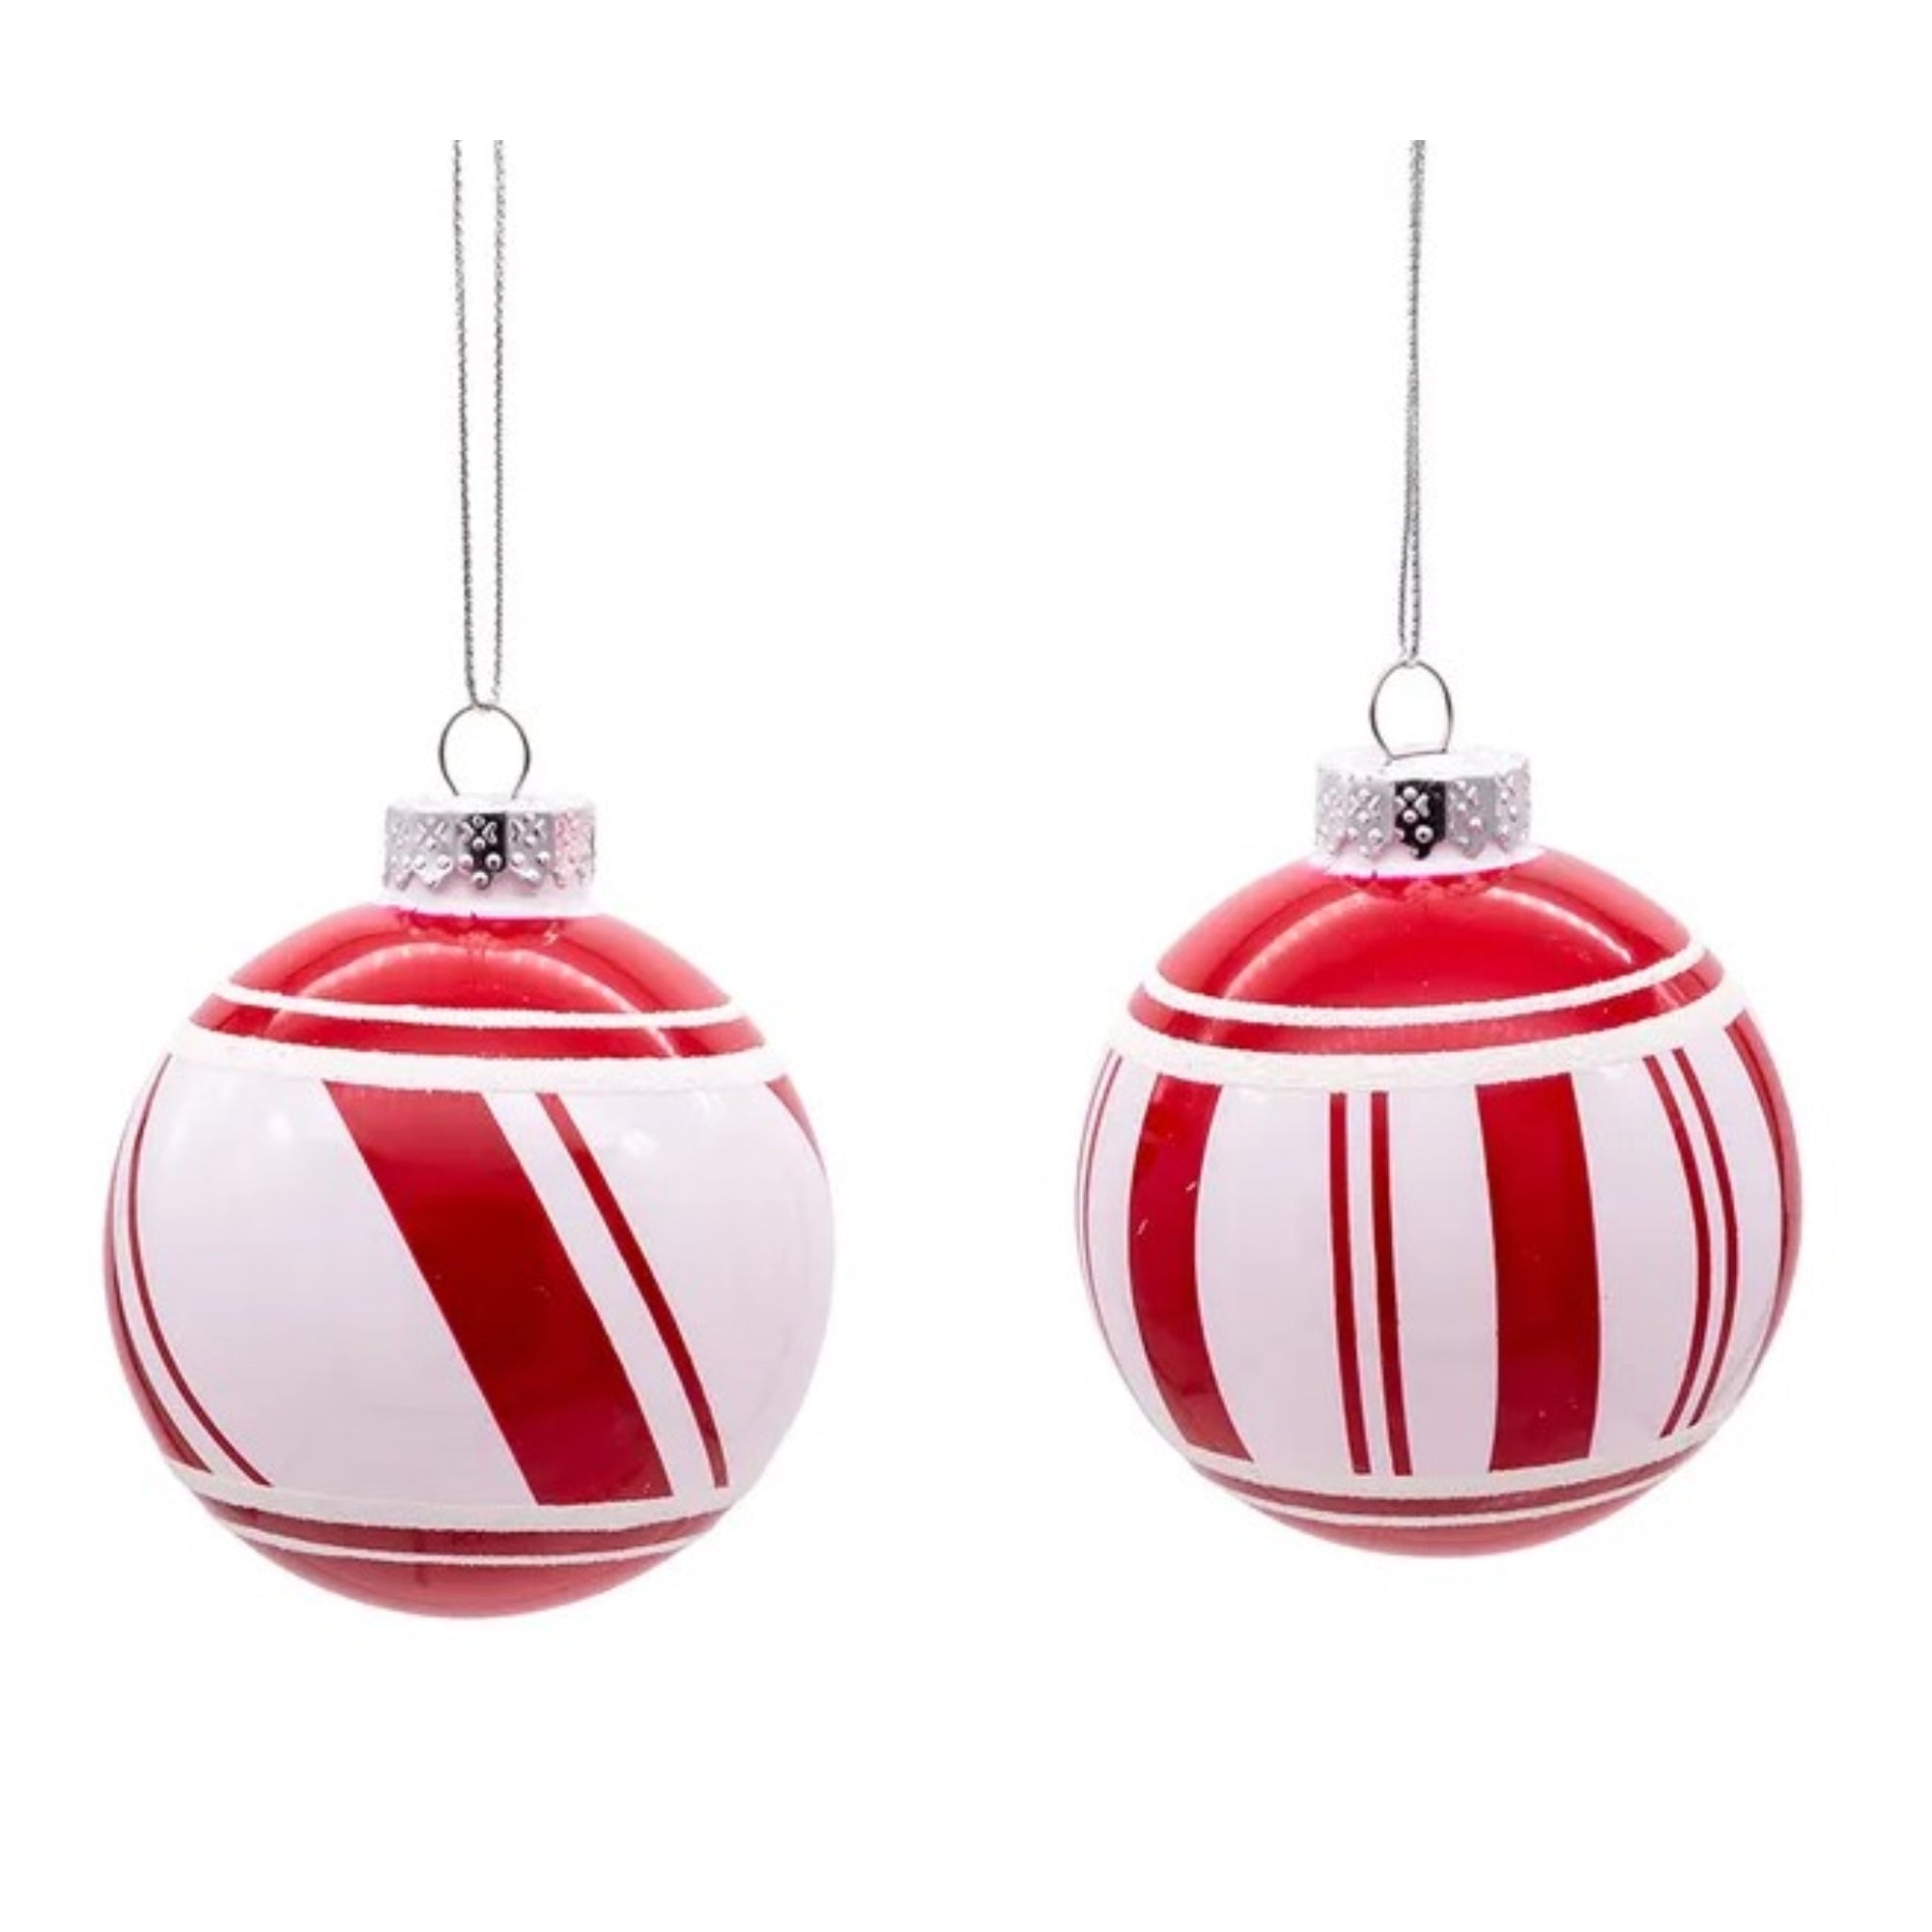 Kurt Adler Glass Red and White Ball Ornaments, 6-Piece Box, 3"